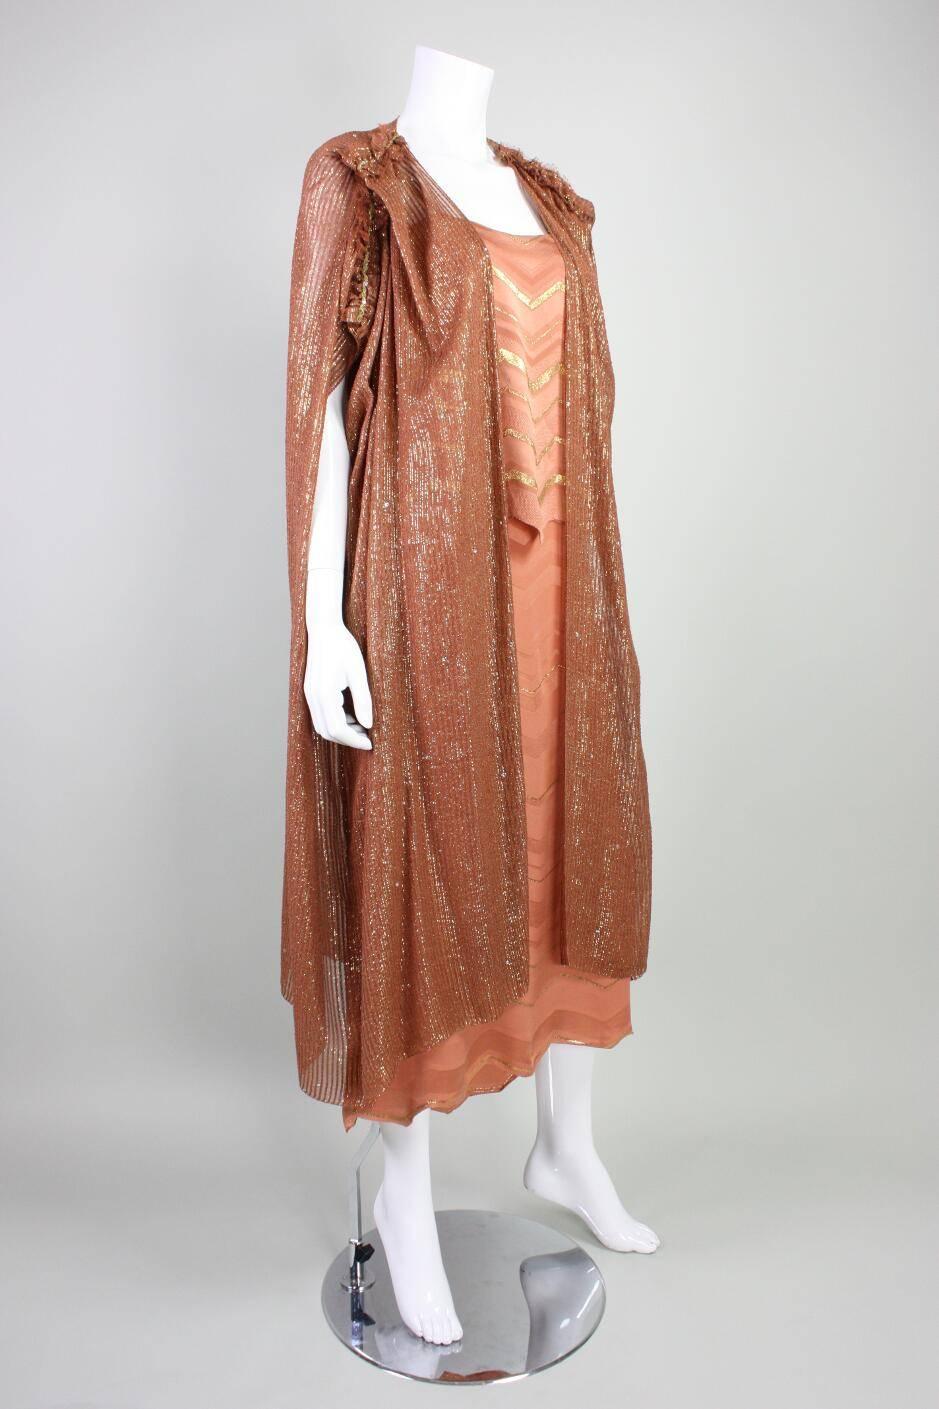 Vintage dress with cocoon coat from Holly's Harp likely dates from the late 1970's to the 1980's.  The dress is made of what feels like silk with a lamé stripe and the coat is made of a chiffon, likely silk, with self stripe.  The dress has a